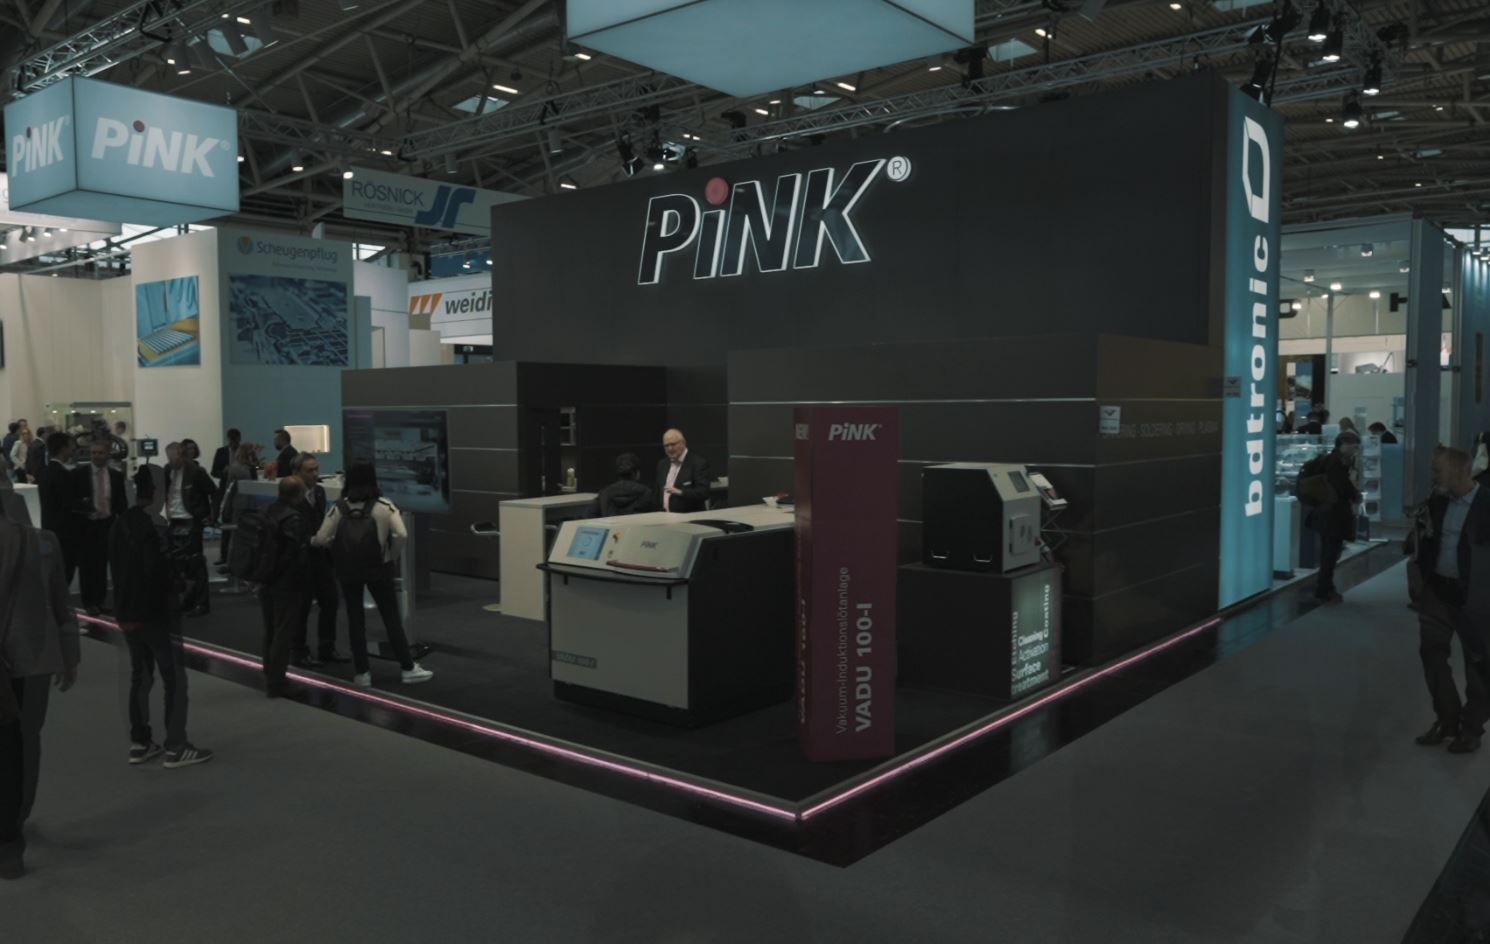 PINK at Productronica 2019